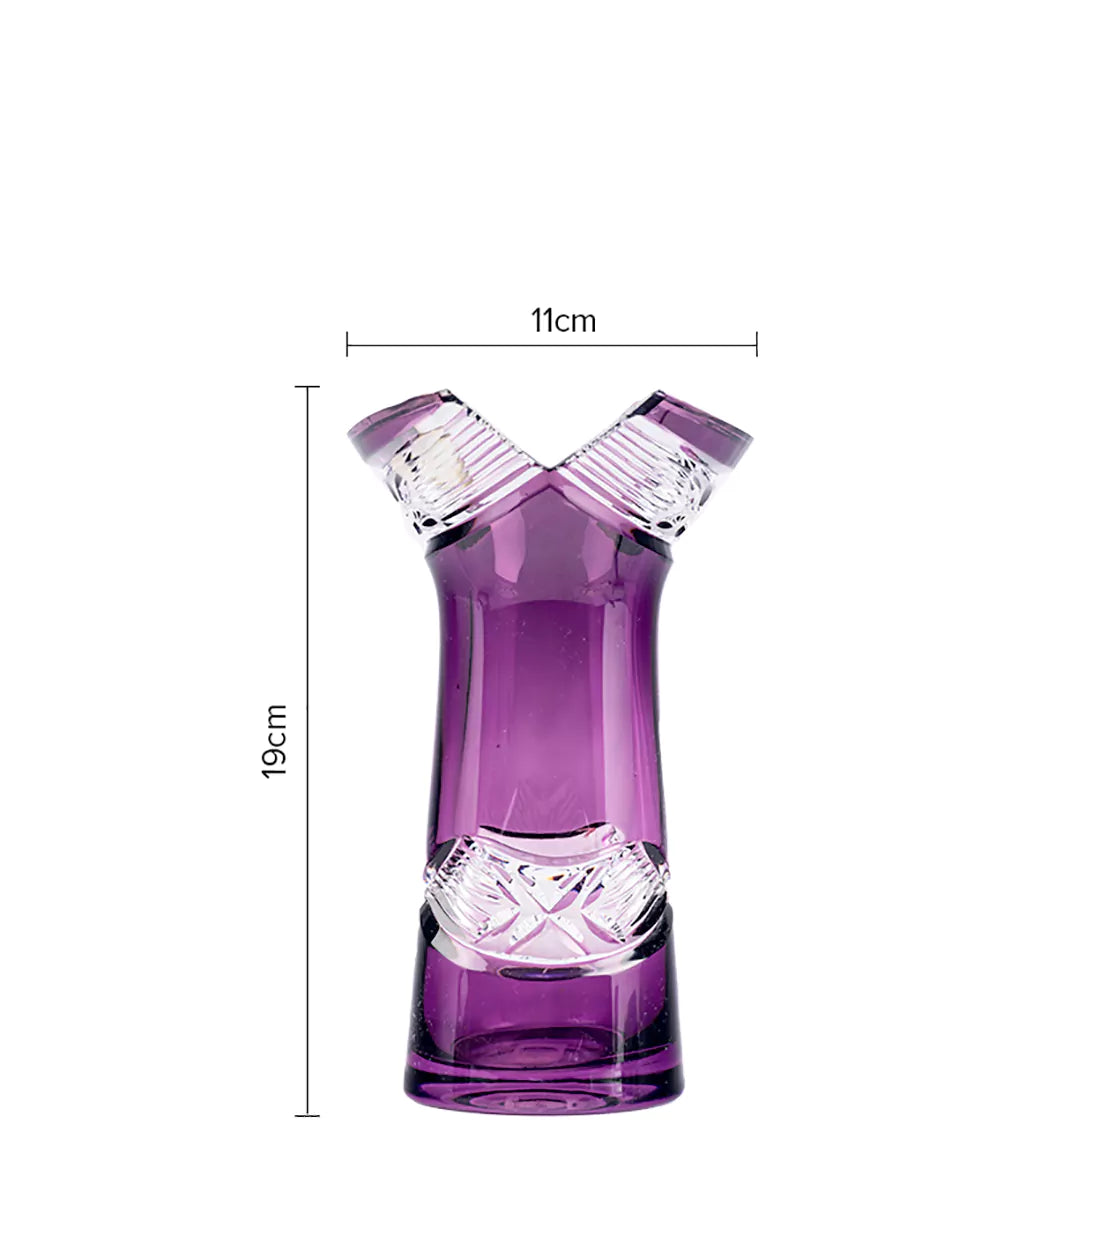 CAESAR CRYSTAL BOHEMIAE - Lavender Fusion - A high-quality sleek vase to embellish your space.